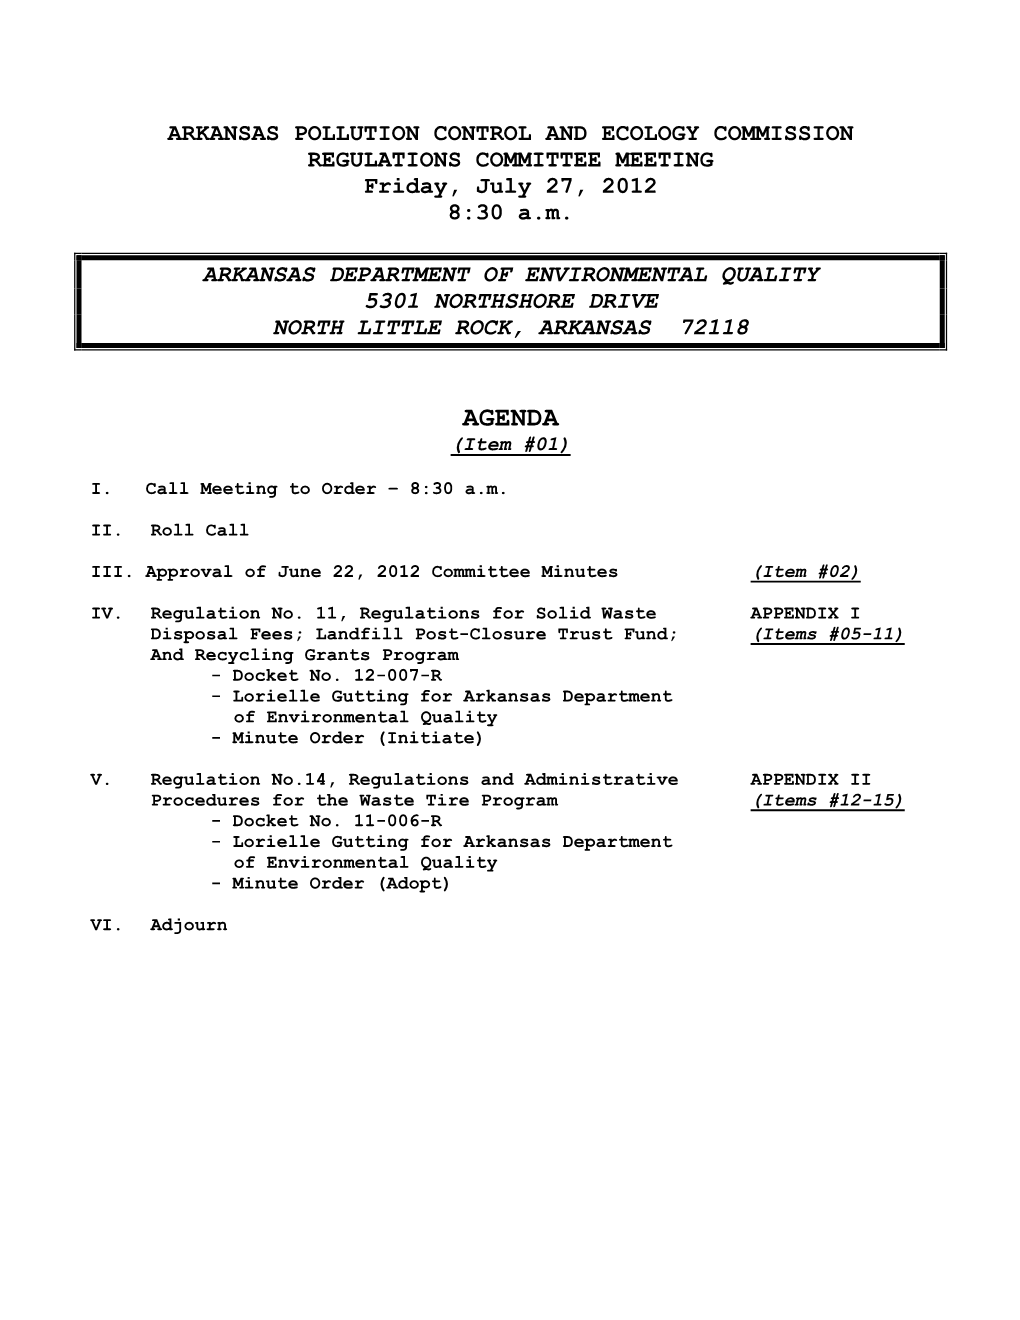 ARKANSAS POLLUTION CONTROL and ECOLOGY COMMISSION REGULATIONS COMMITTEE MEETING Friday, July 27, 2012 8:30 A.M